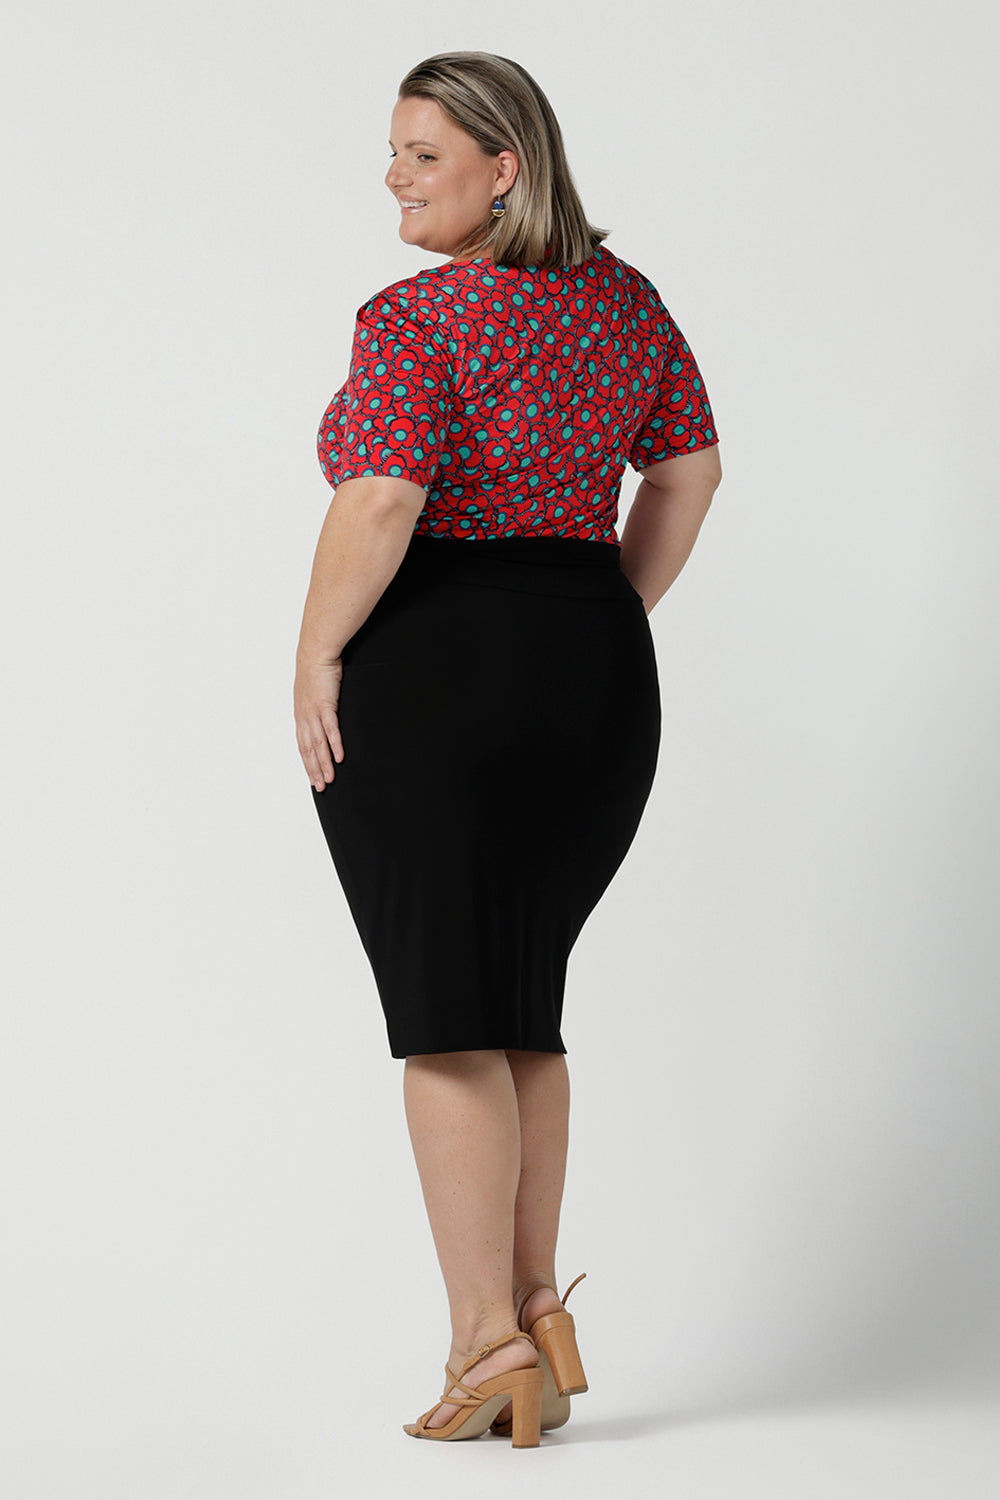 Back view of a size 12 woman wears the Ziggy top in Rio with a red base and seventies style floral. Round and conservative neckline. Short sleeve and made in Australia for women size 8 - 24.